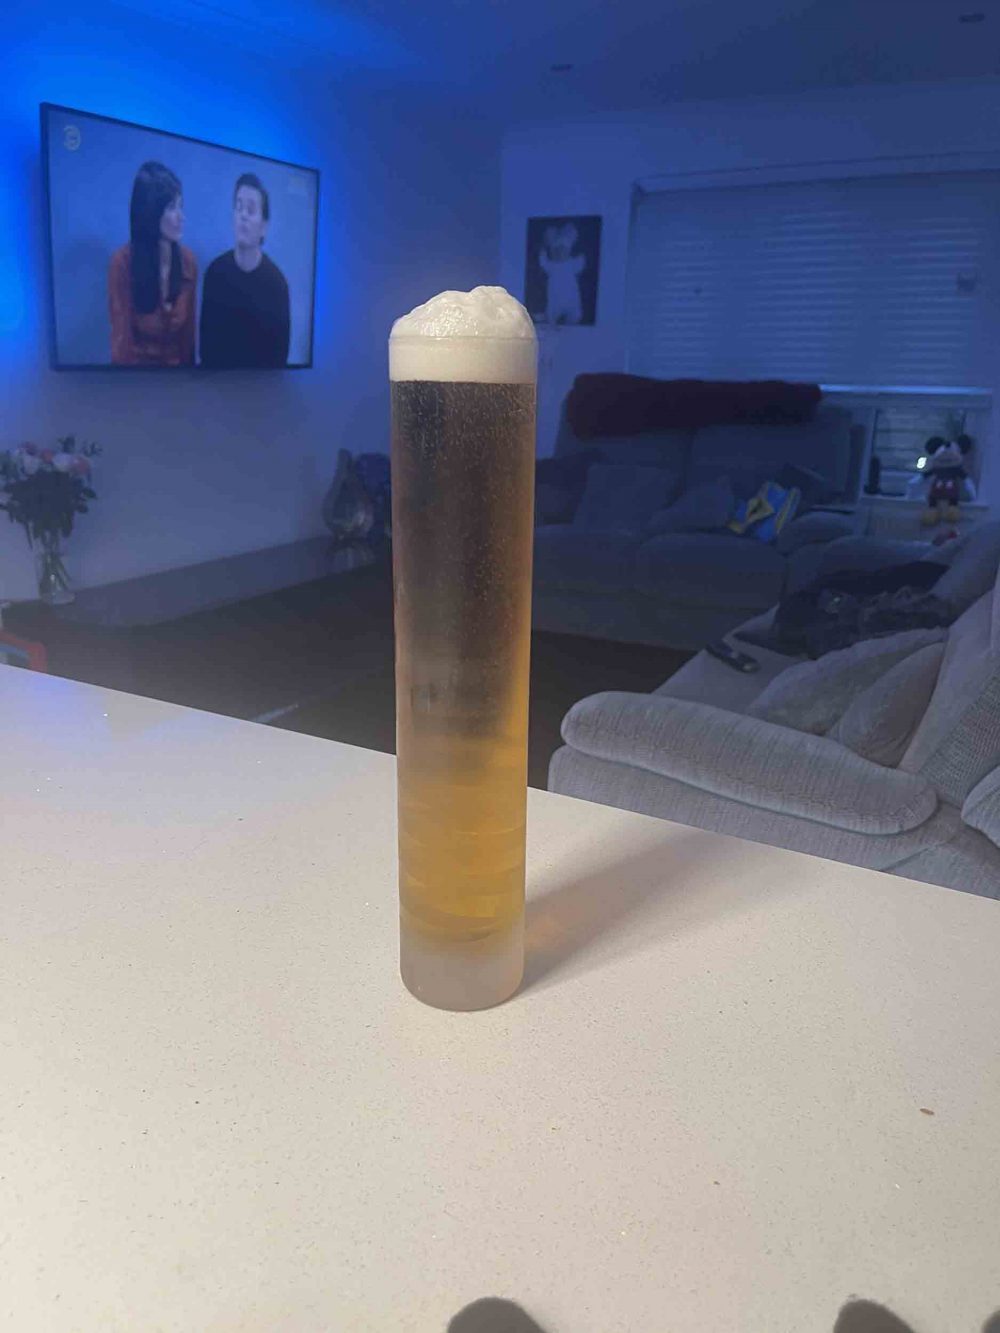 A picture of a vase filled with beer - Viral News Scotland